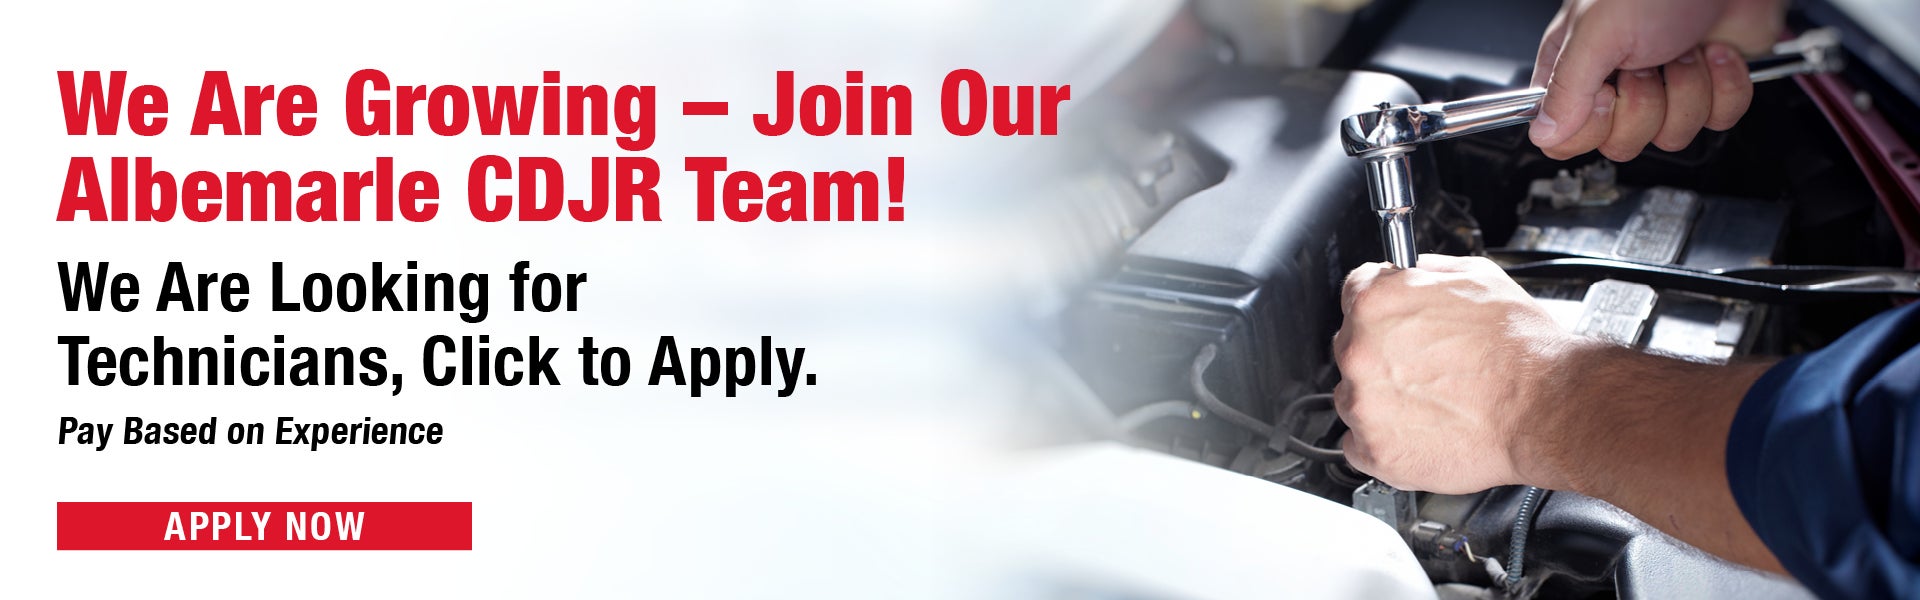 We Are Growing – Join Our Albemarle CDJR Team!